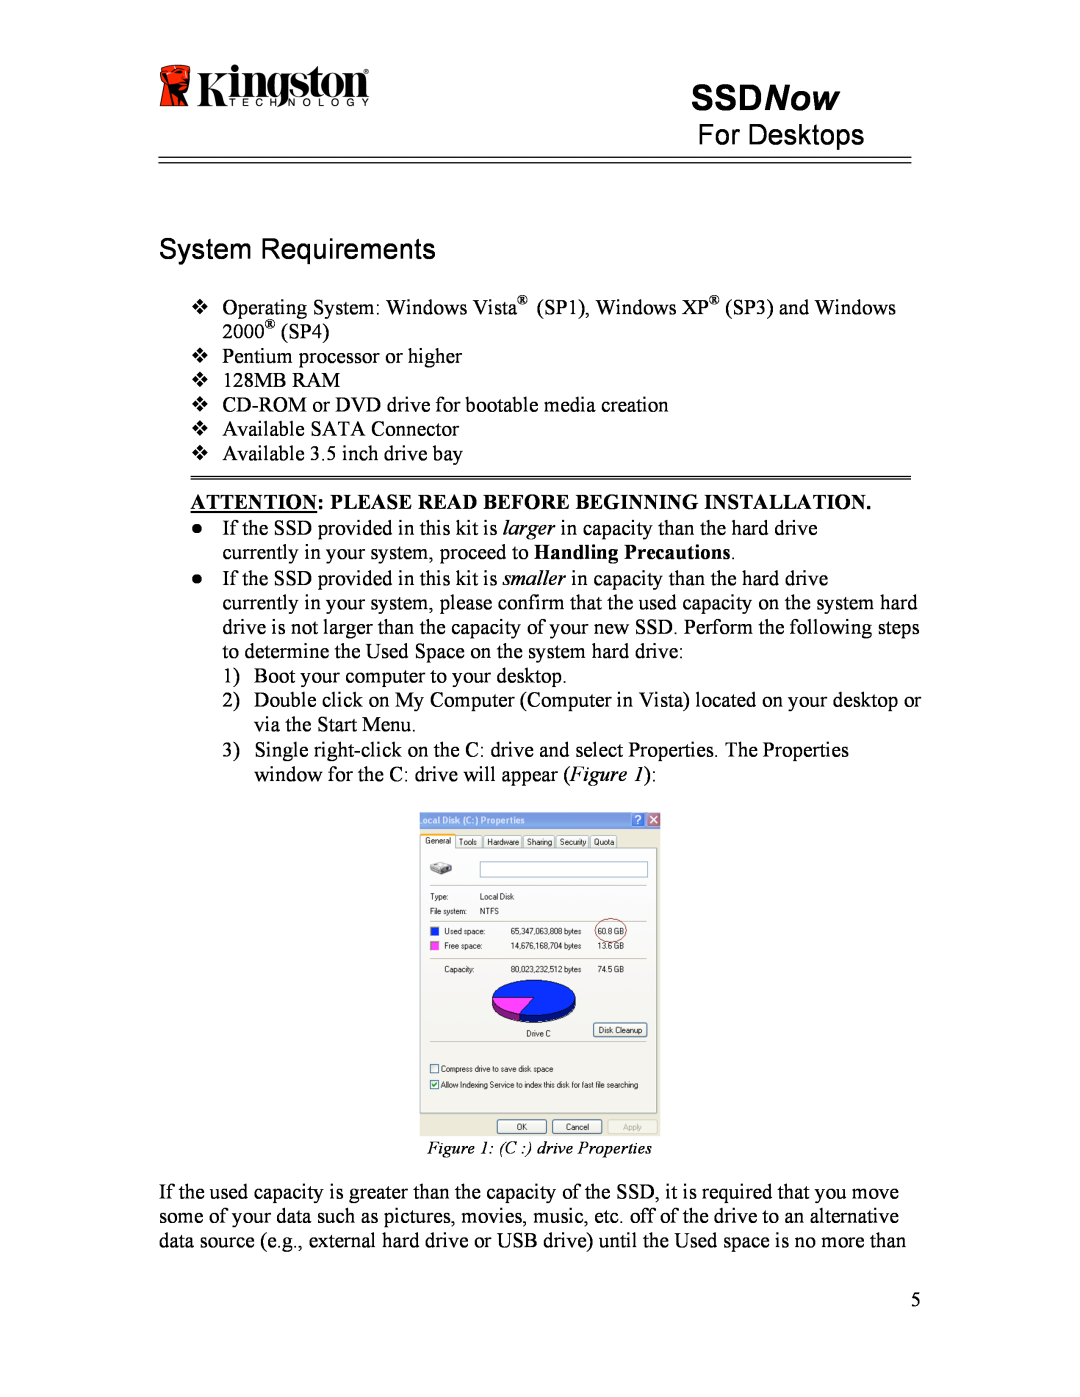 Kingston Technology 07-16-2009 manual For Desktops System Requirements, SSDNow 